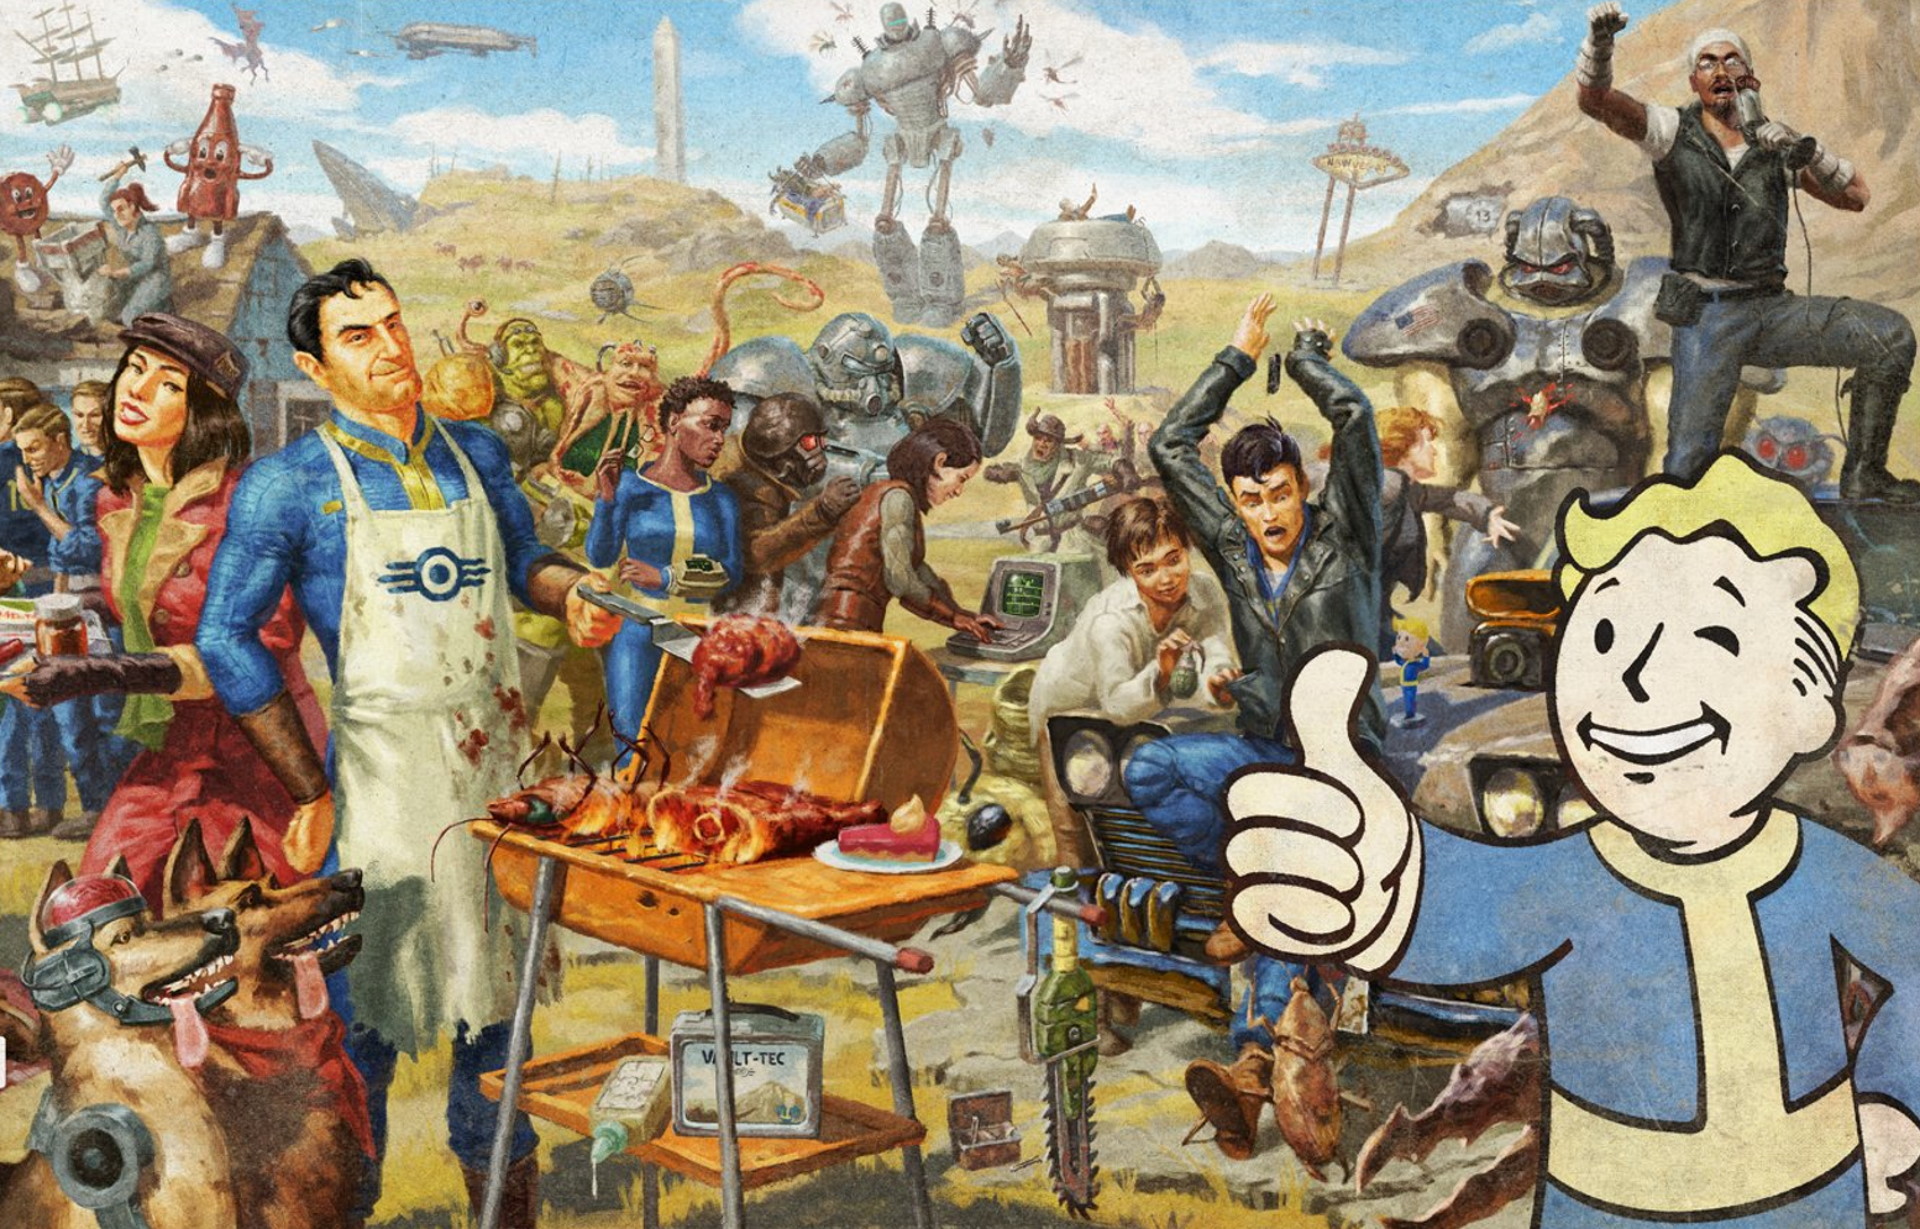 Fallout 76 is free this week to celebrate a big series birthday